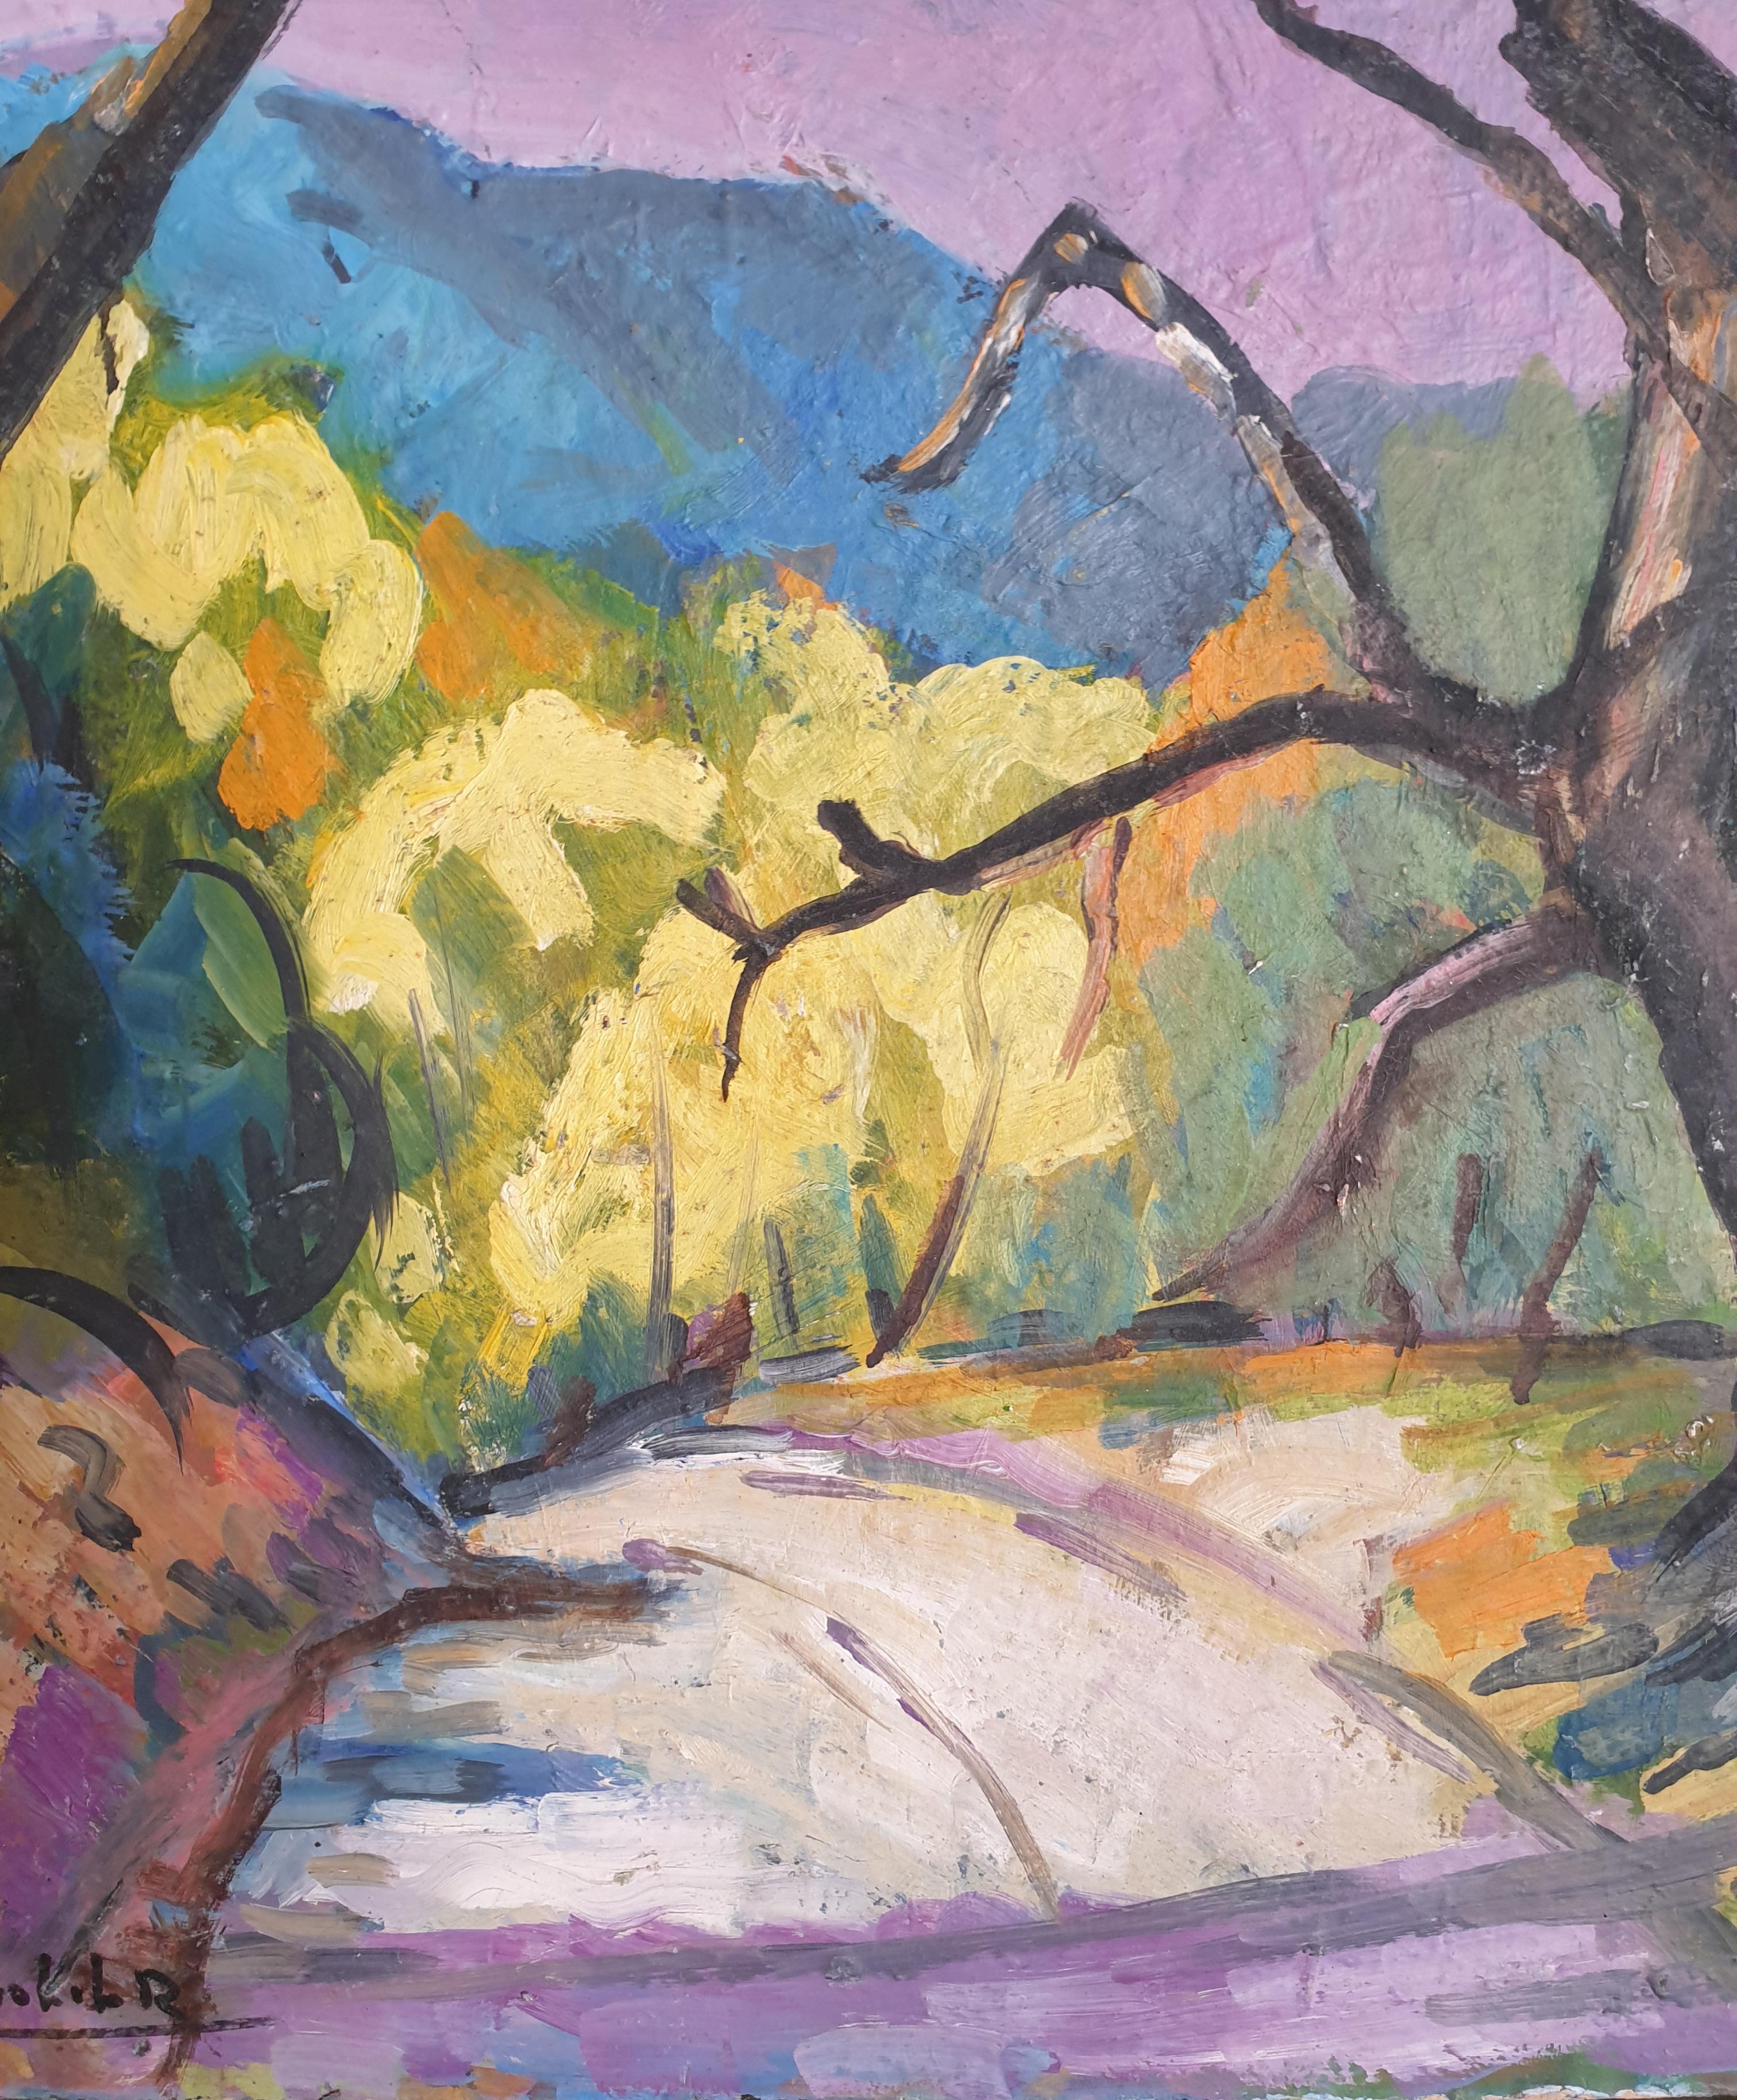 The Road, Mid-century Provençal, Fauvist Landscape. Oil on Board. - Gray Figurative Painting by Hyppolite Roger